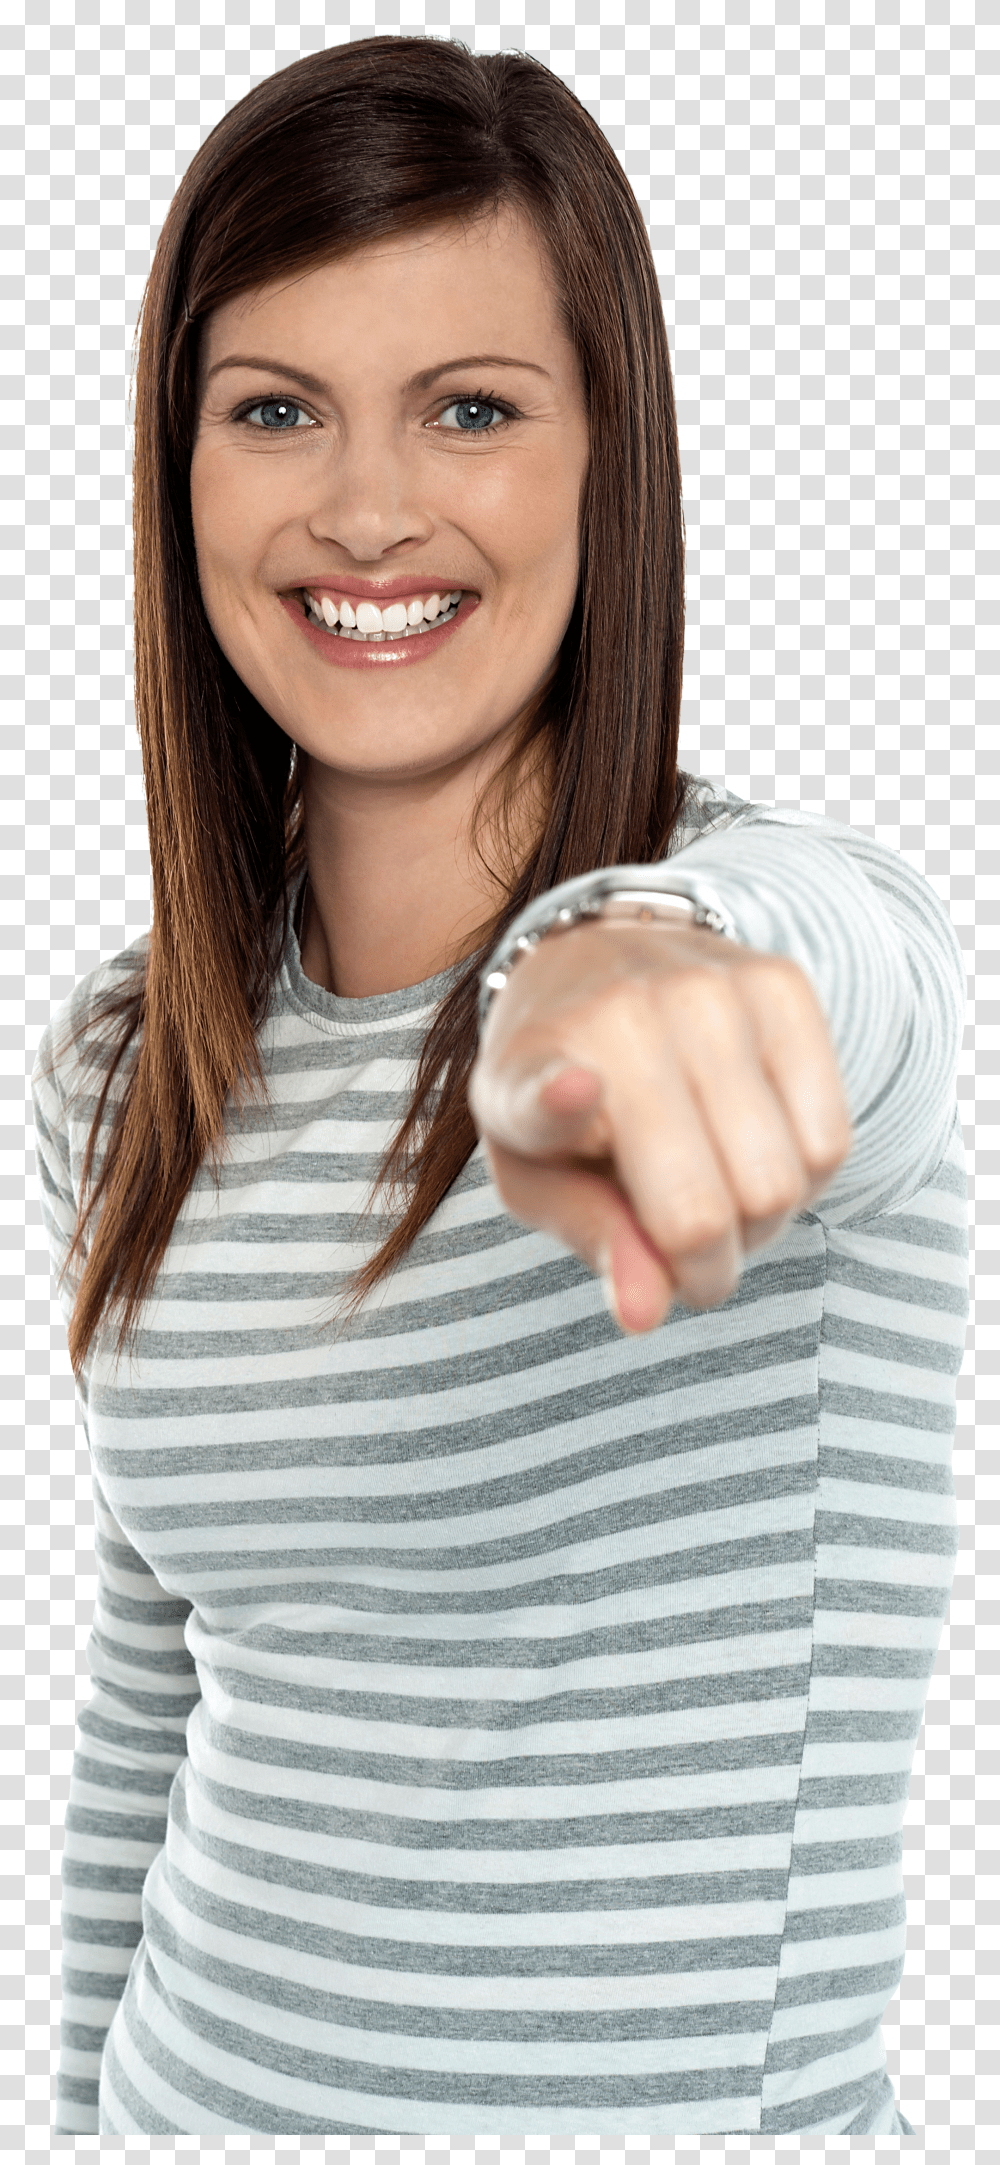 Finger Pointing At You Transparent Png